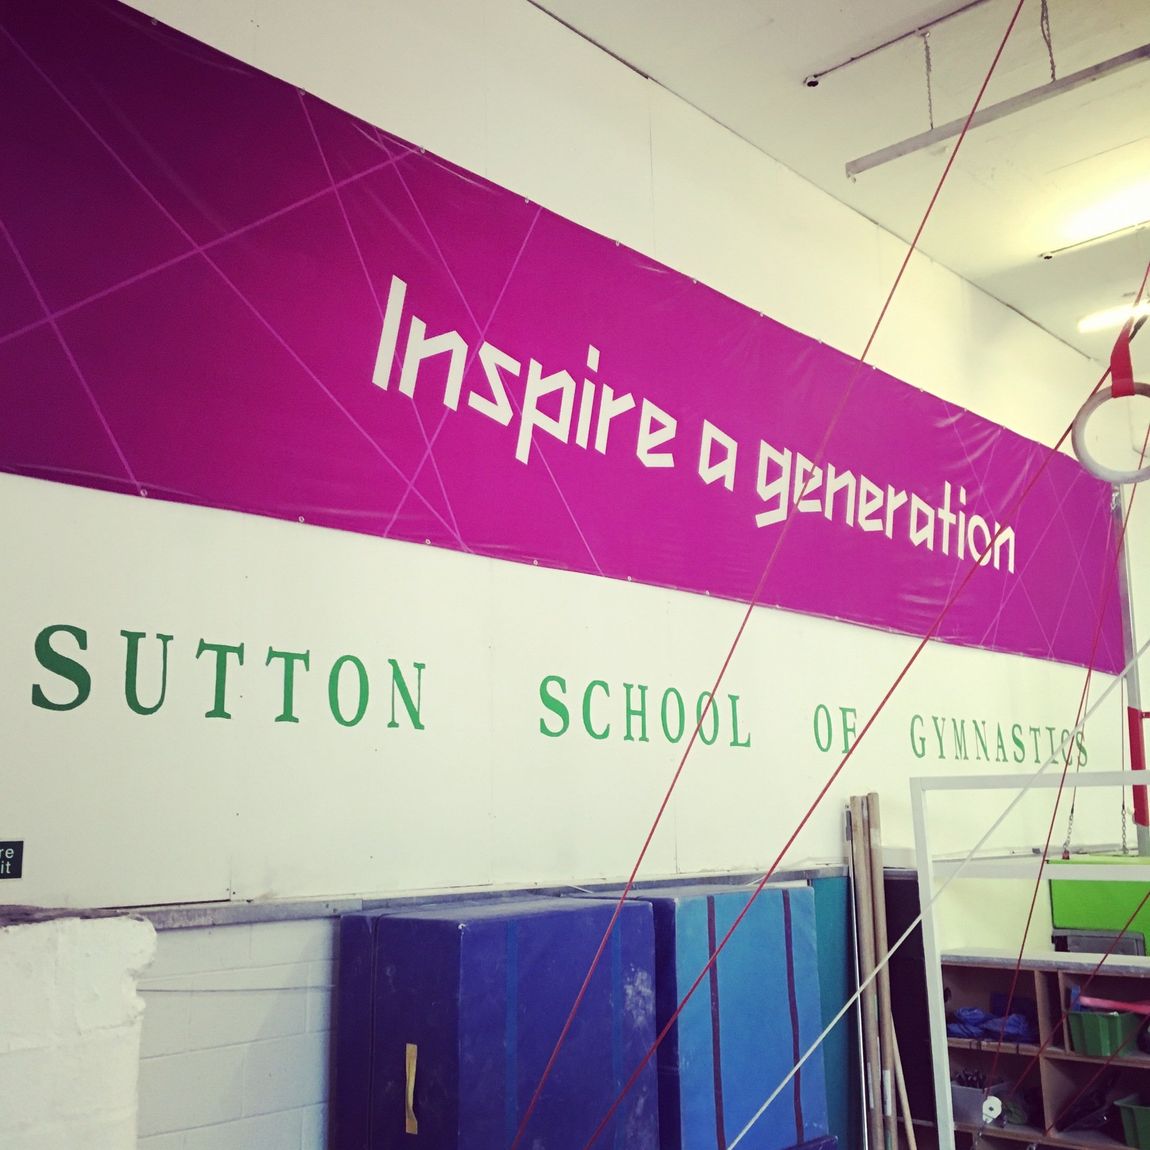 Sutton School of Gymnastics name with the London 2012 Olympic banner